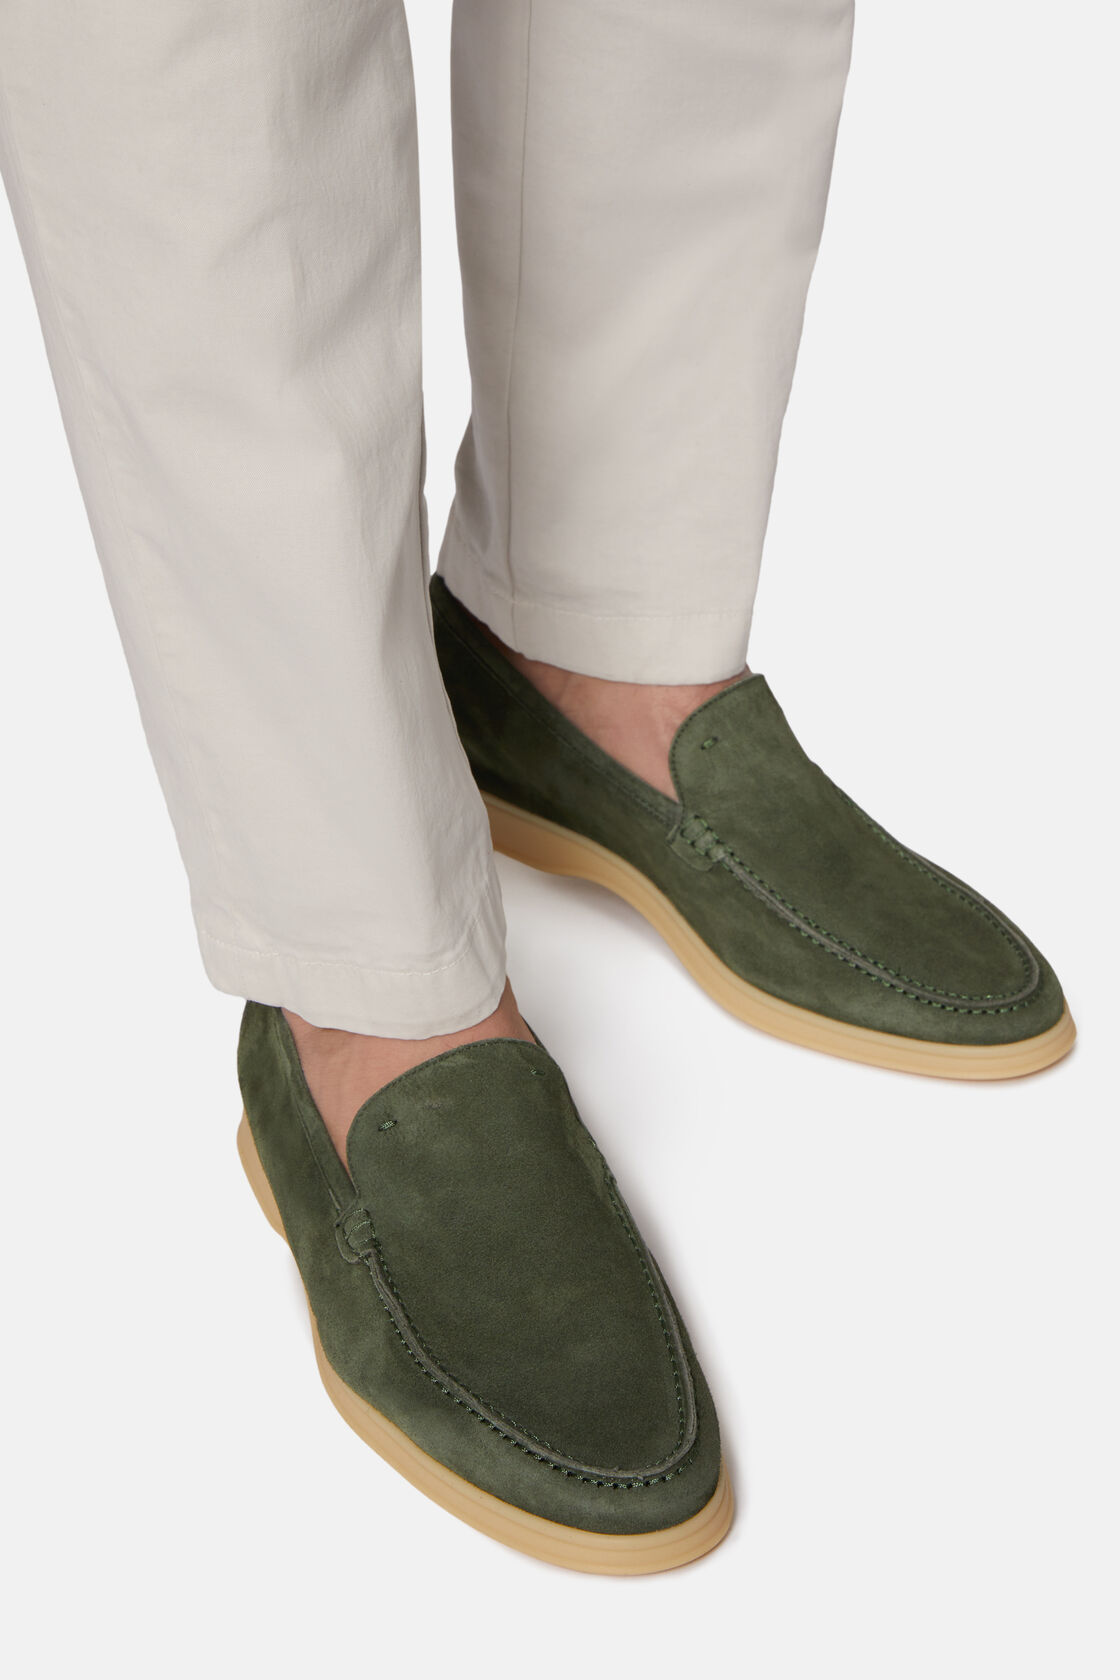 Aria Suede Loafers, Green, hi-res